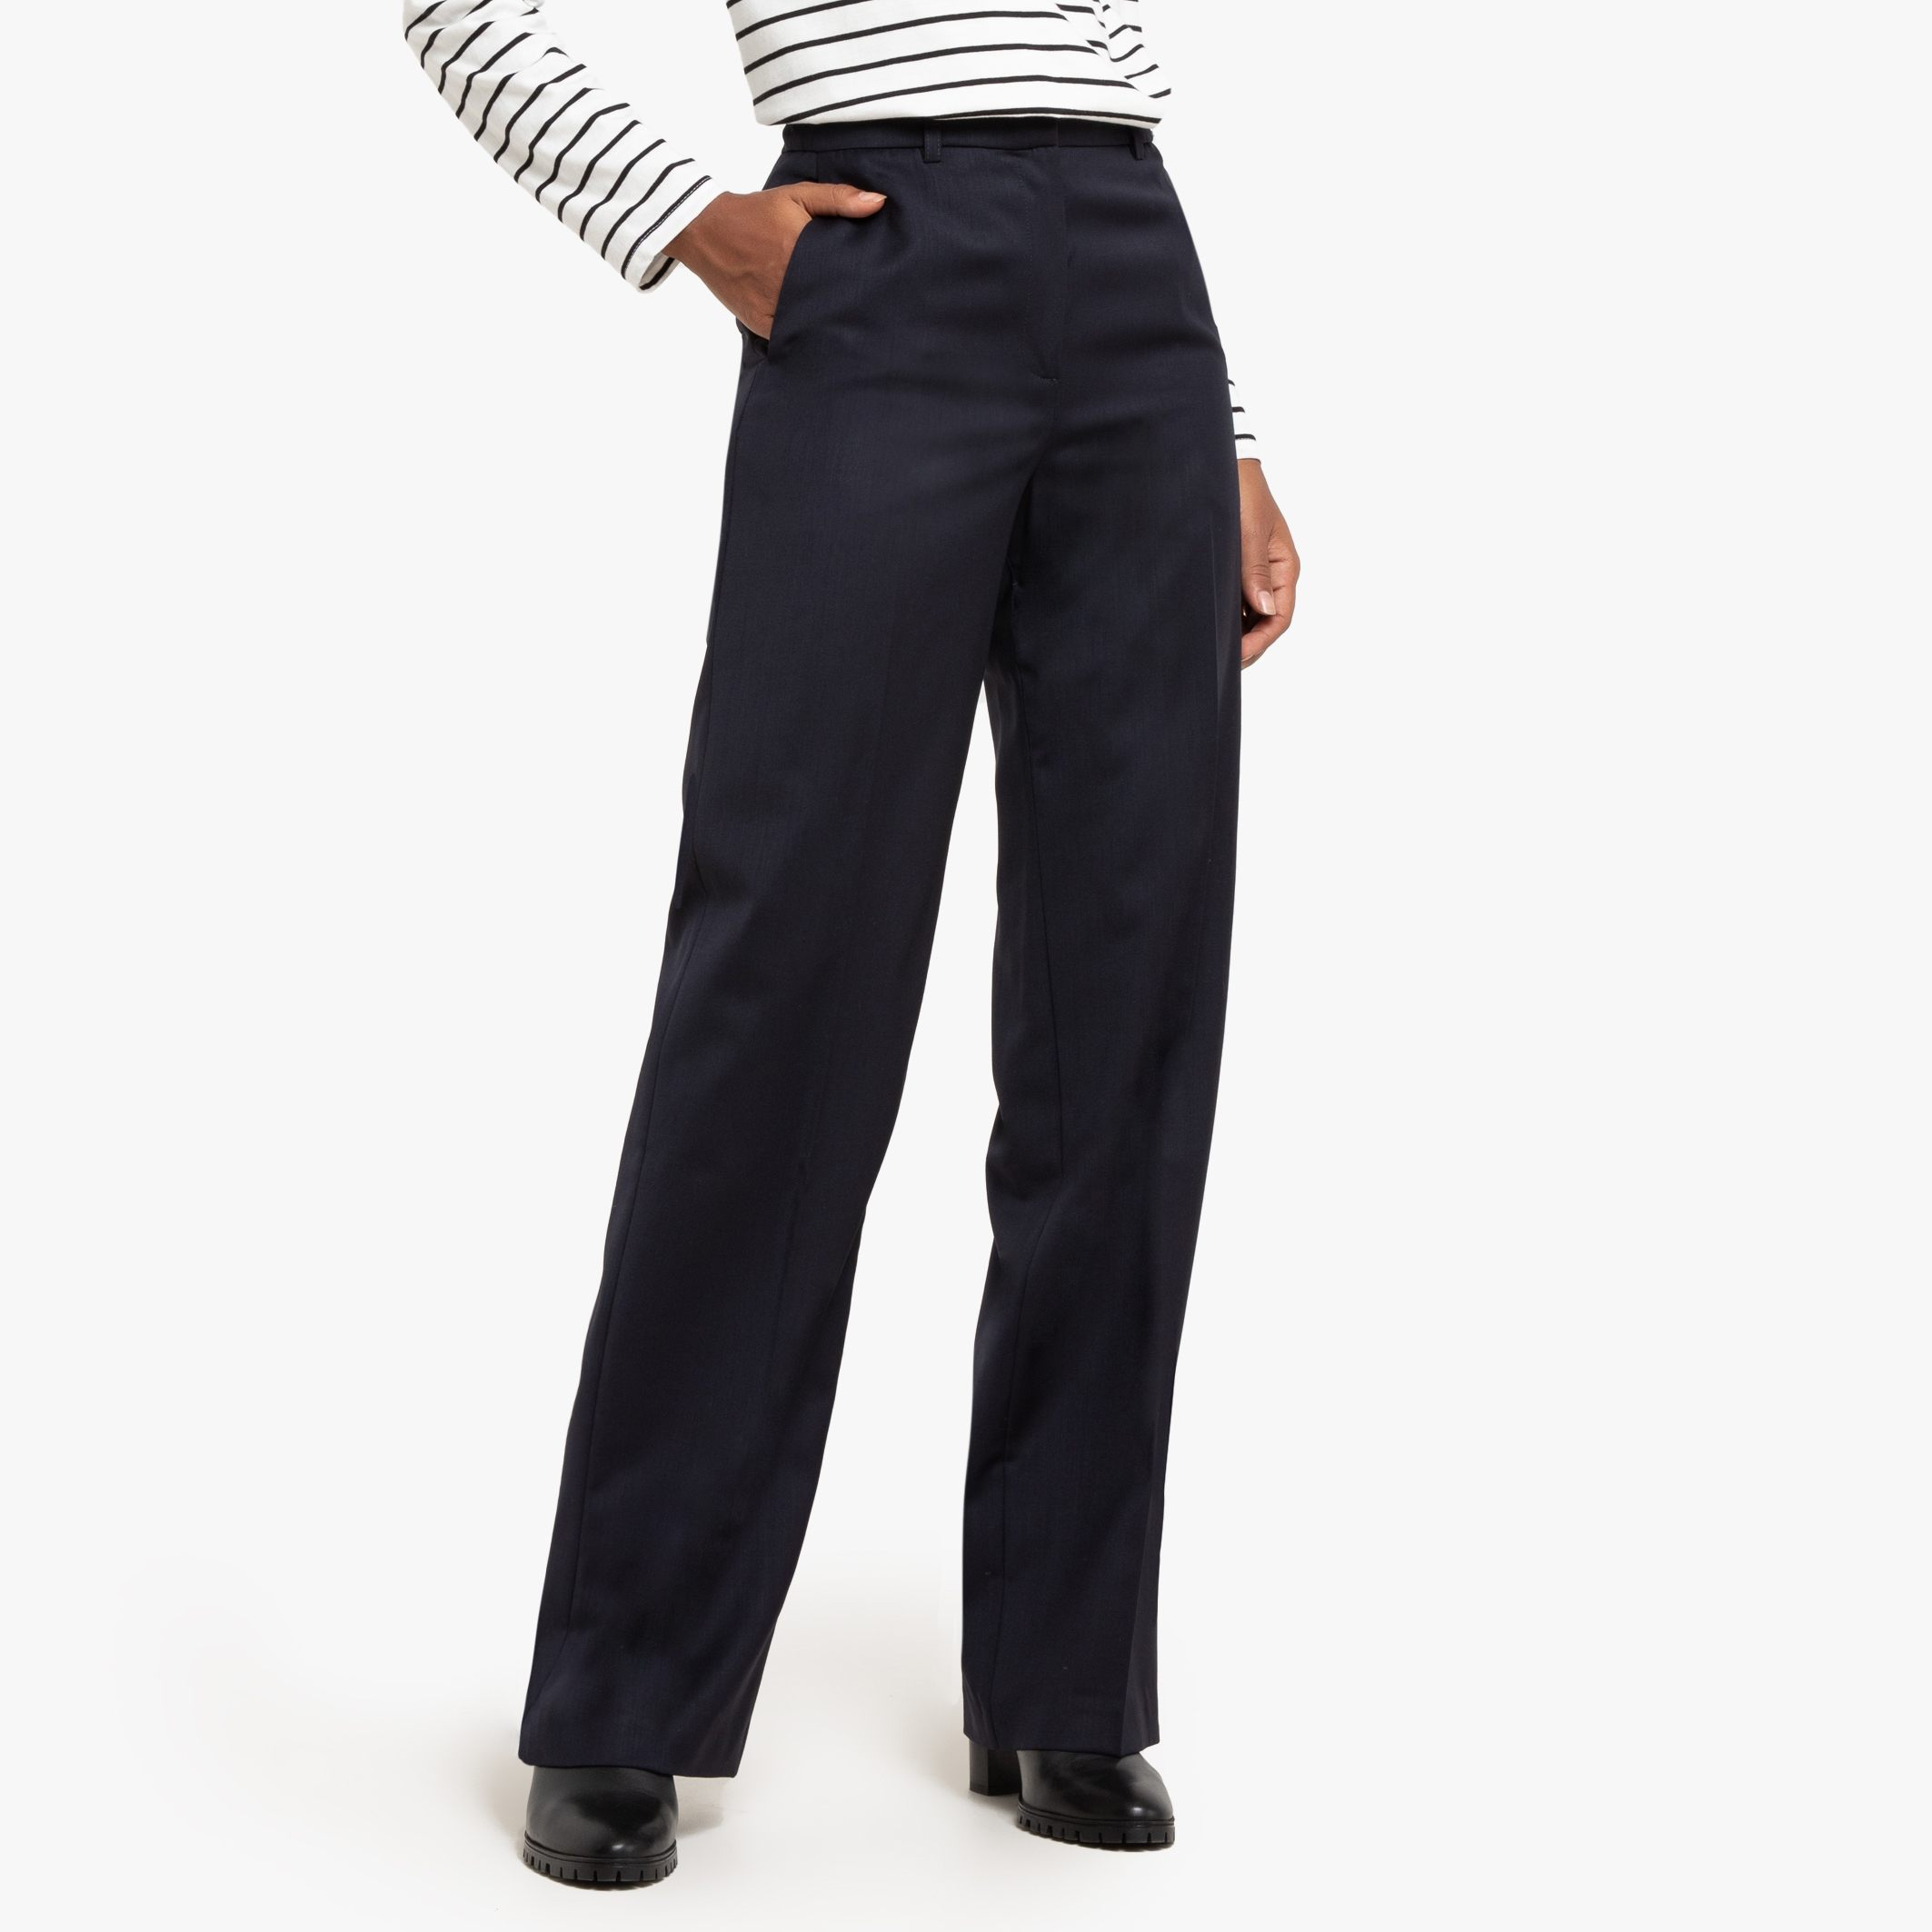 Wool Mix Straight Trousers Length 31 5 La Redoute Collections La